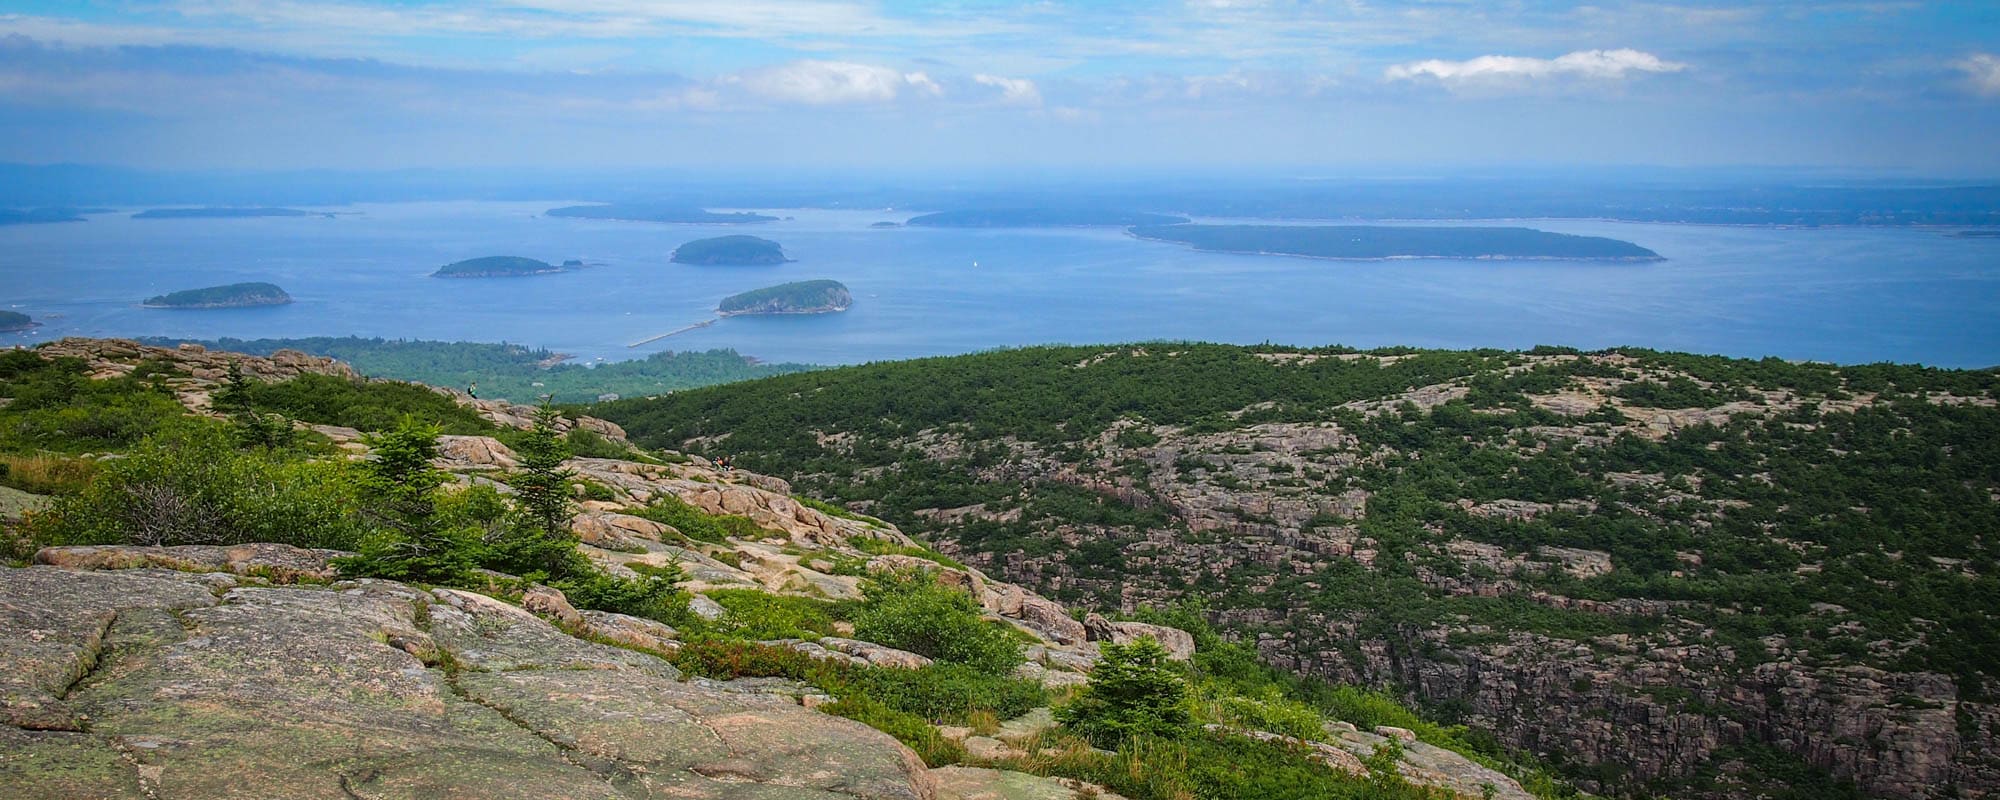 View from Cadillac Mountain summit in Acadia National Park, Maine